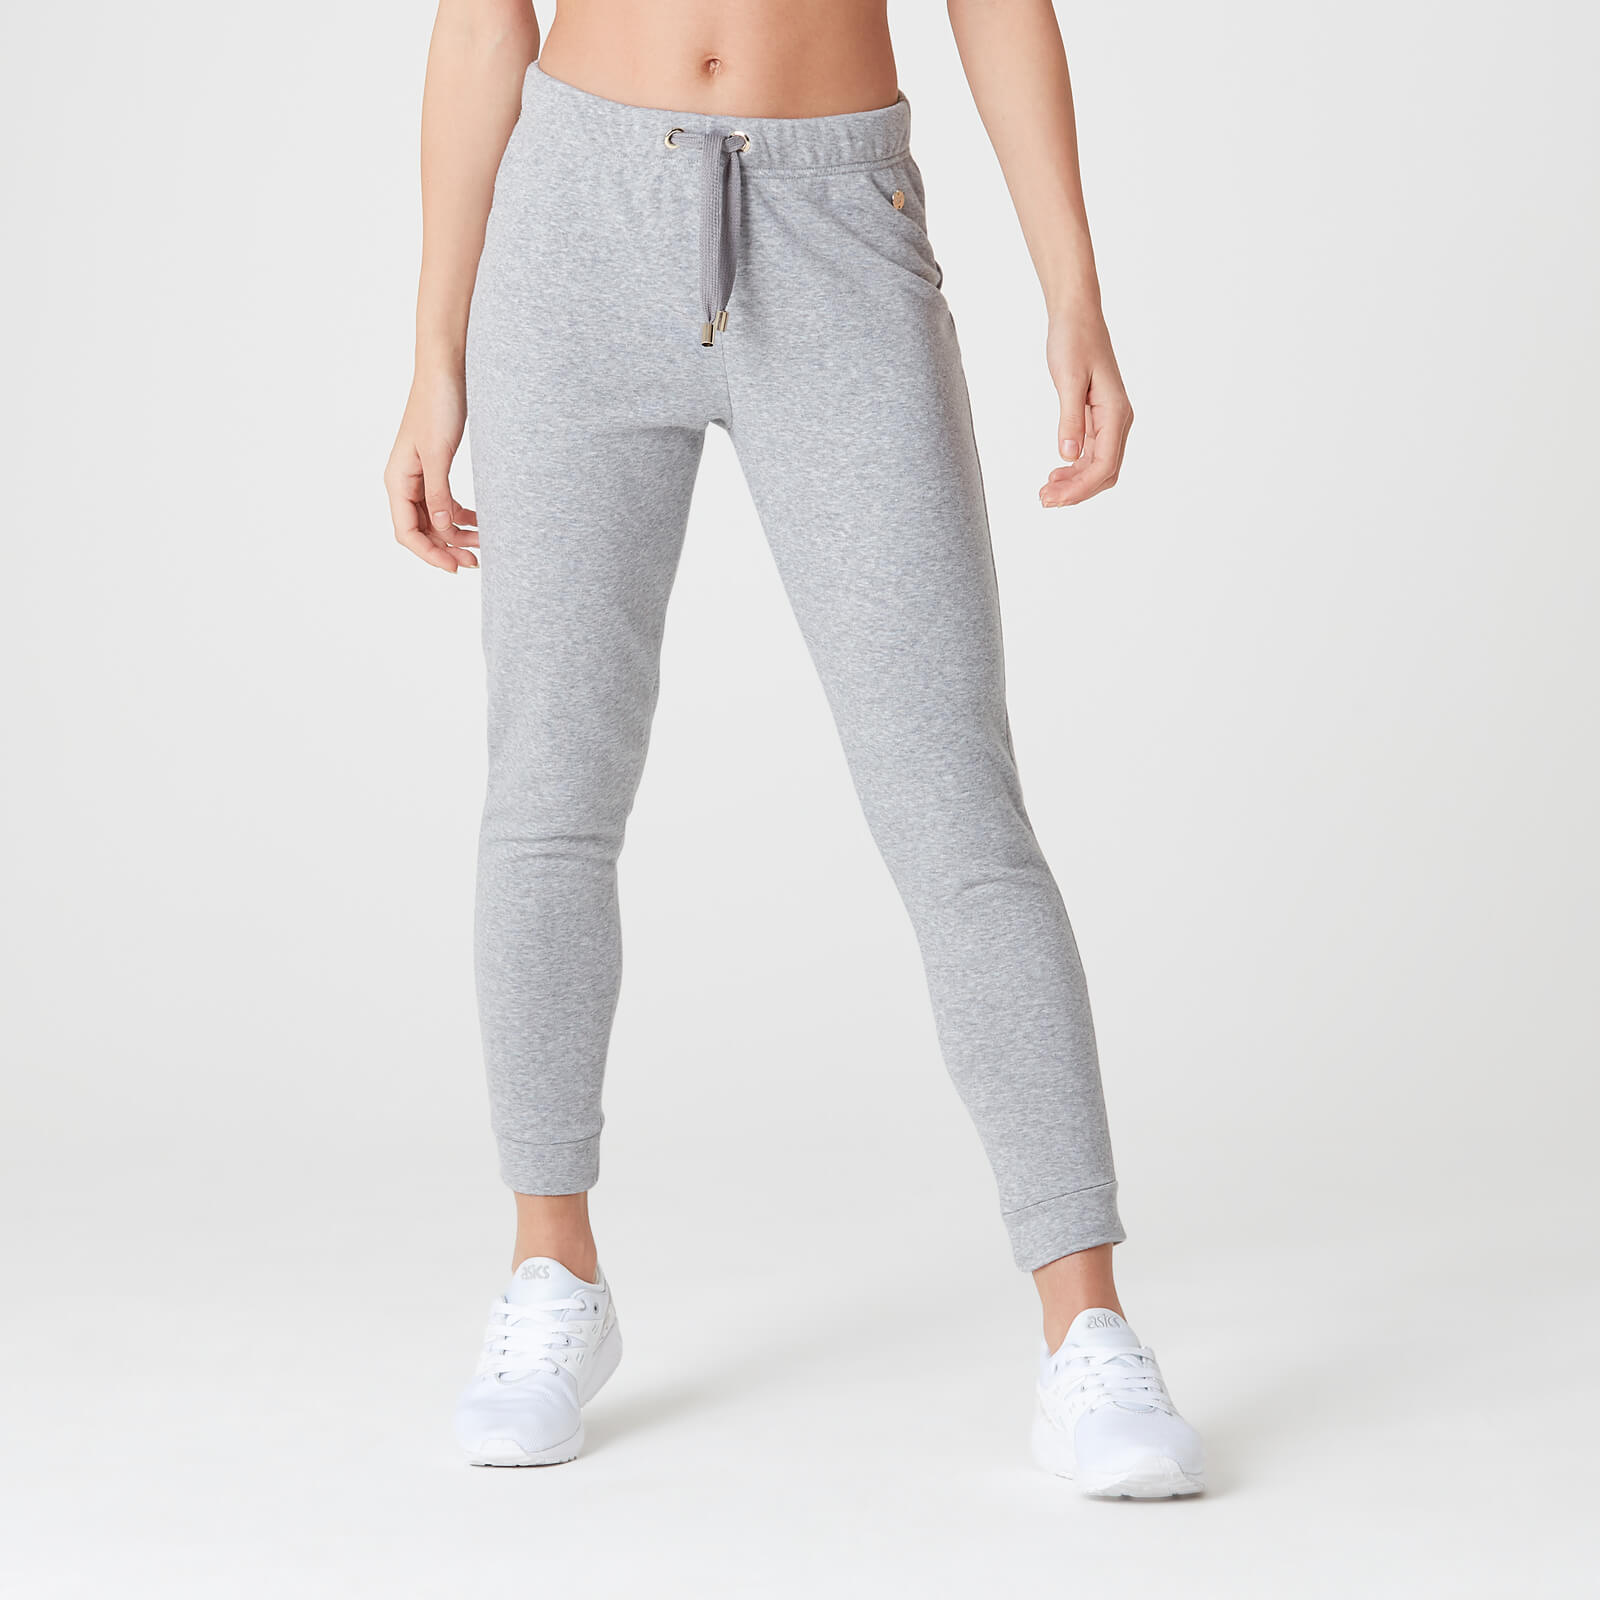 Myprotein Luxe Lounge Jogger - Grey Marl